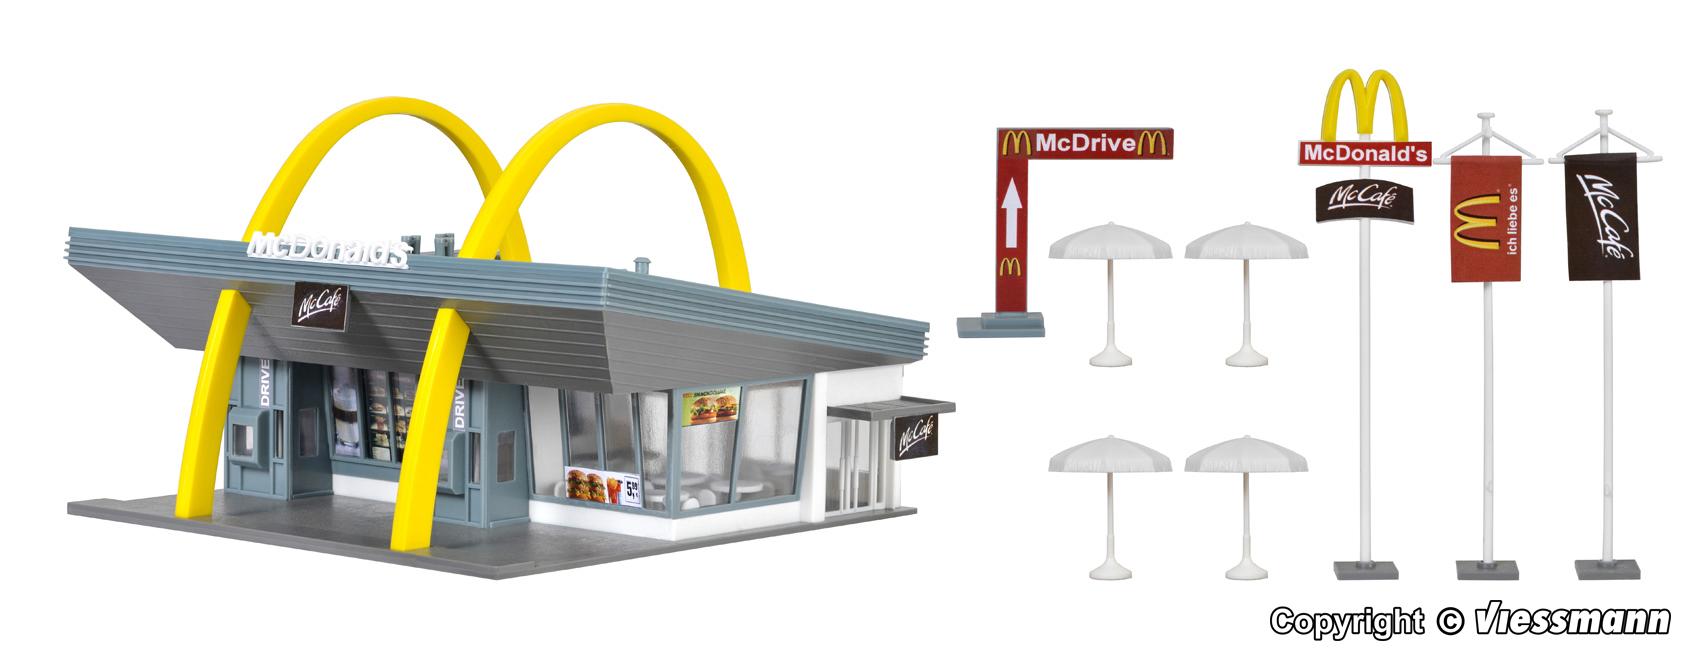 Vollmer 43634 McDonald's fast food restaurant with McDrive